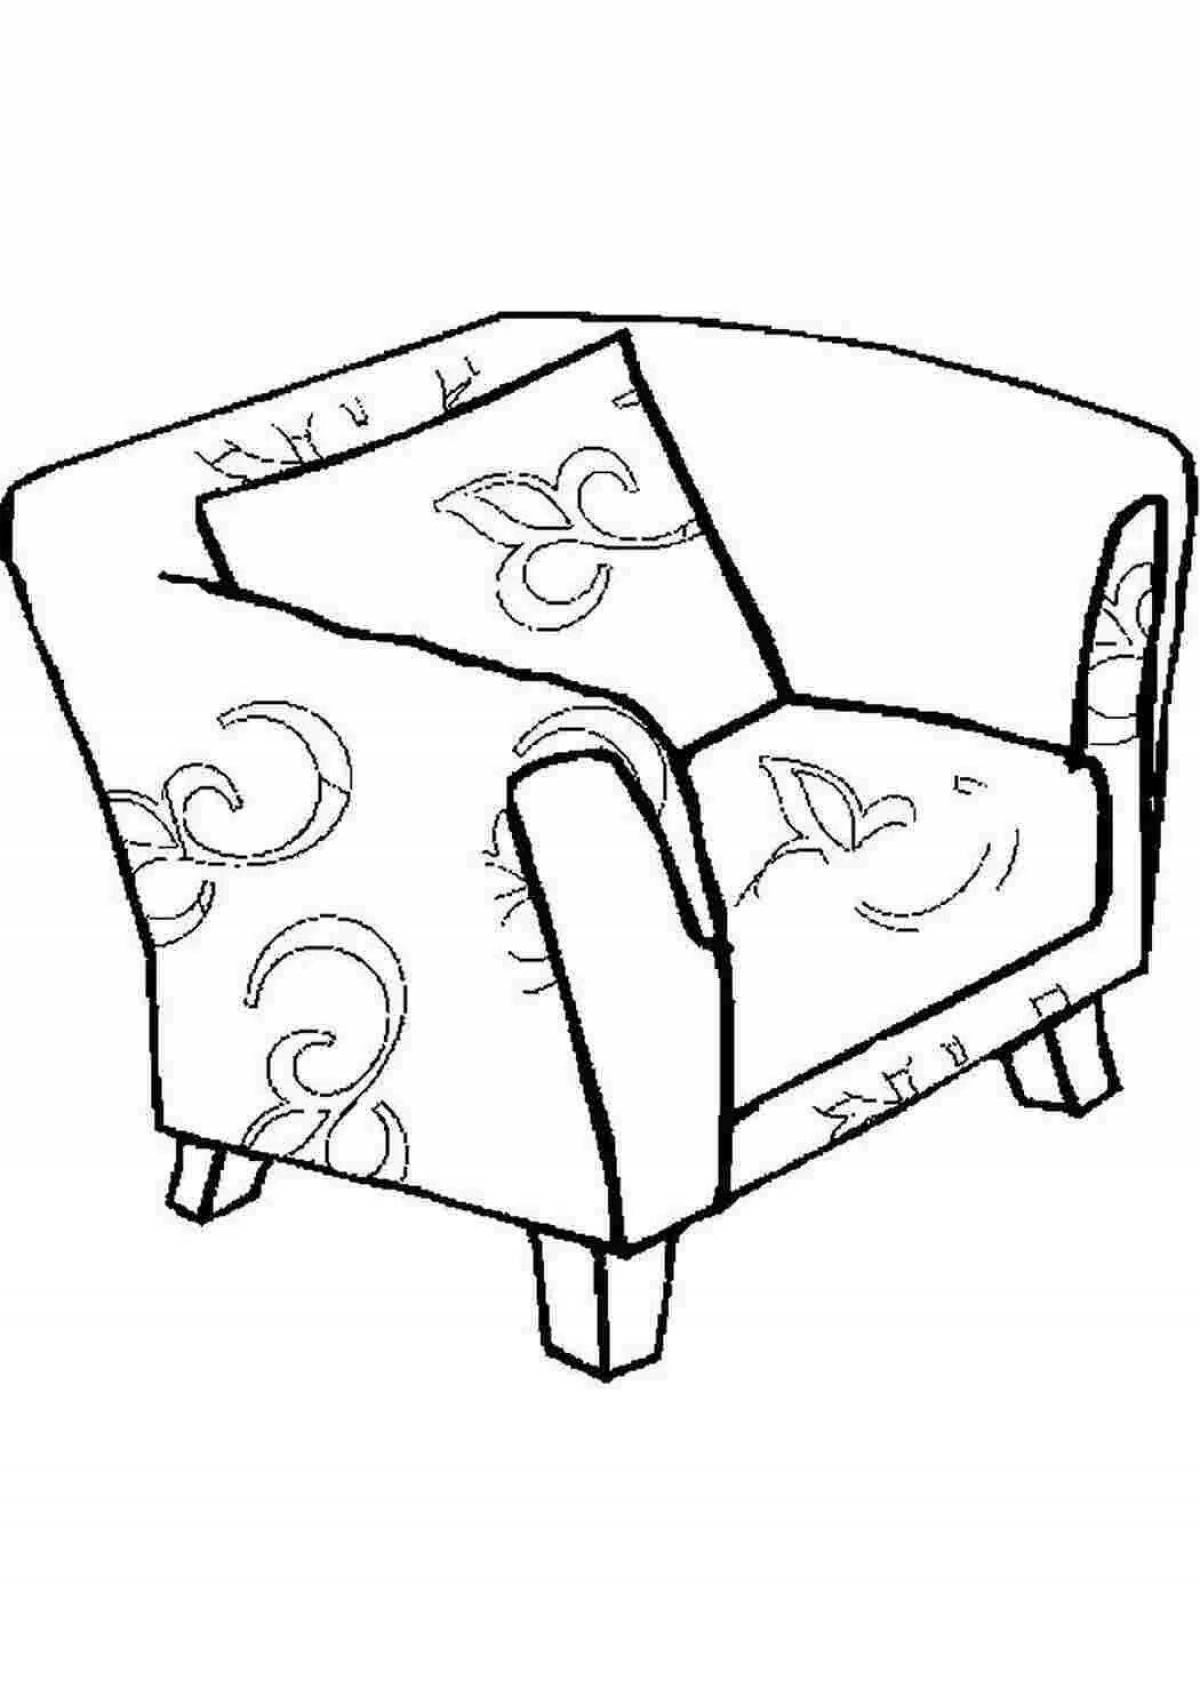 Crazy chair coloring page for 3-4 year olds